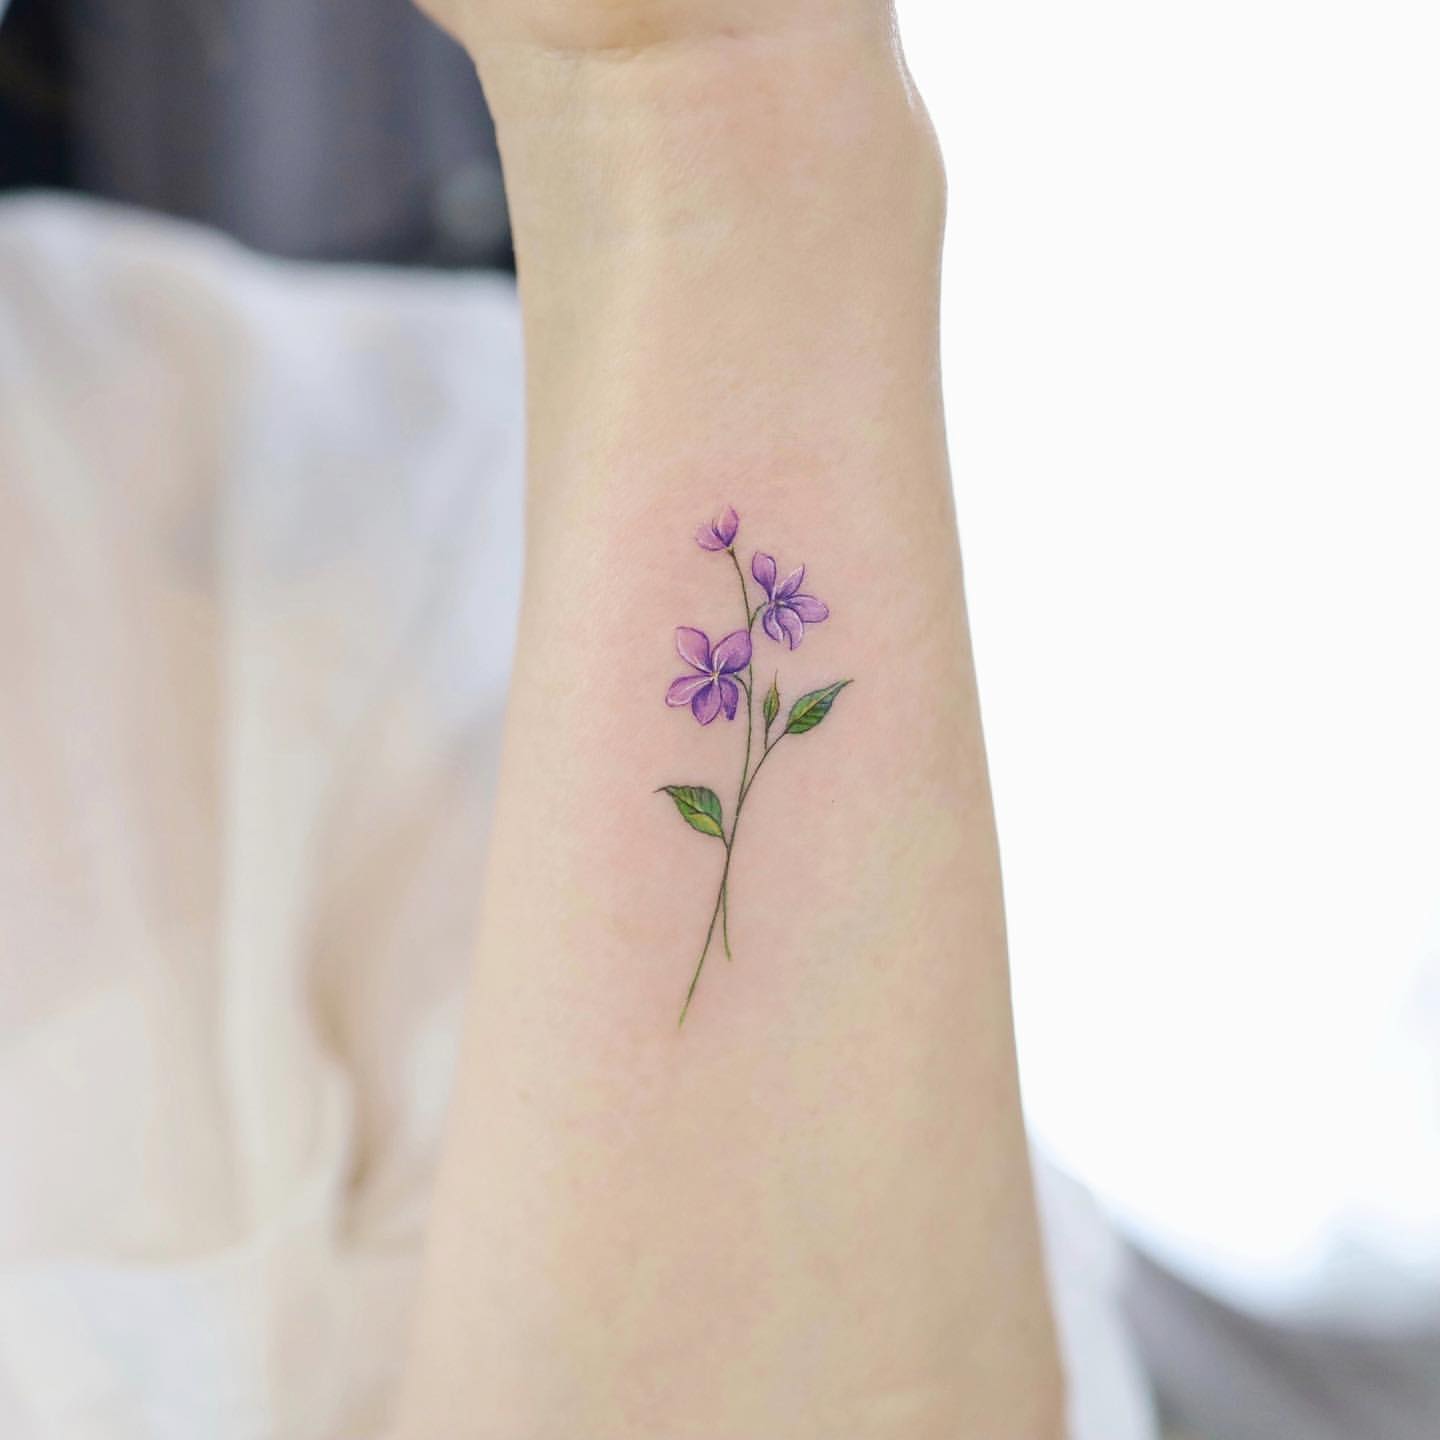 Minimalist Flower Tattoo Designs You Should Get According To Your  Personality  Minimalist floral tattoo Simplicity tattoos Minimalist  tattoo